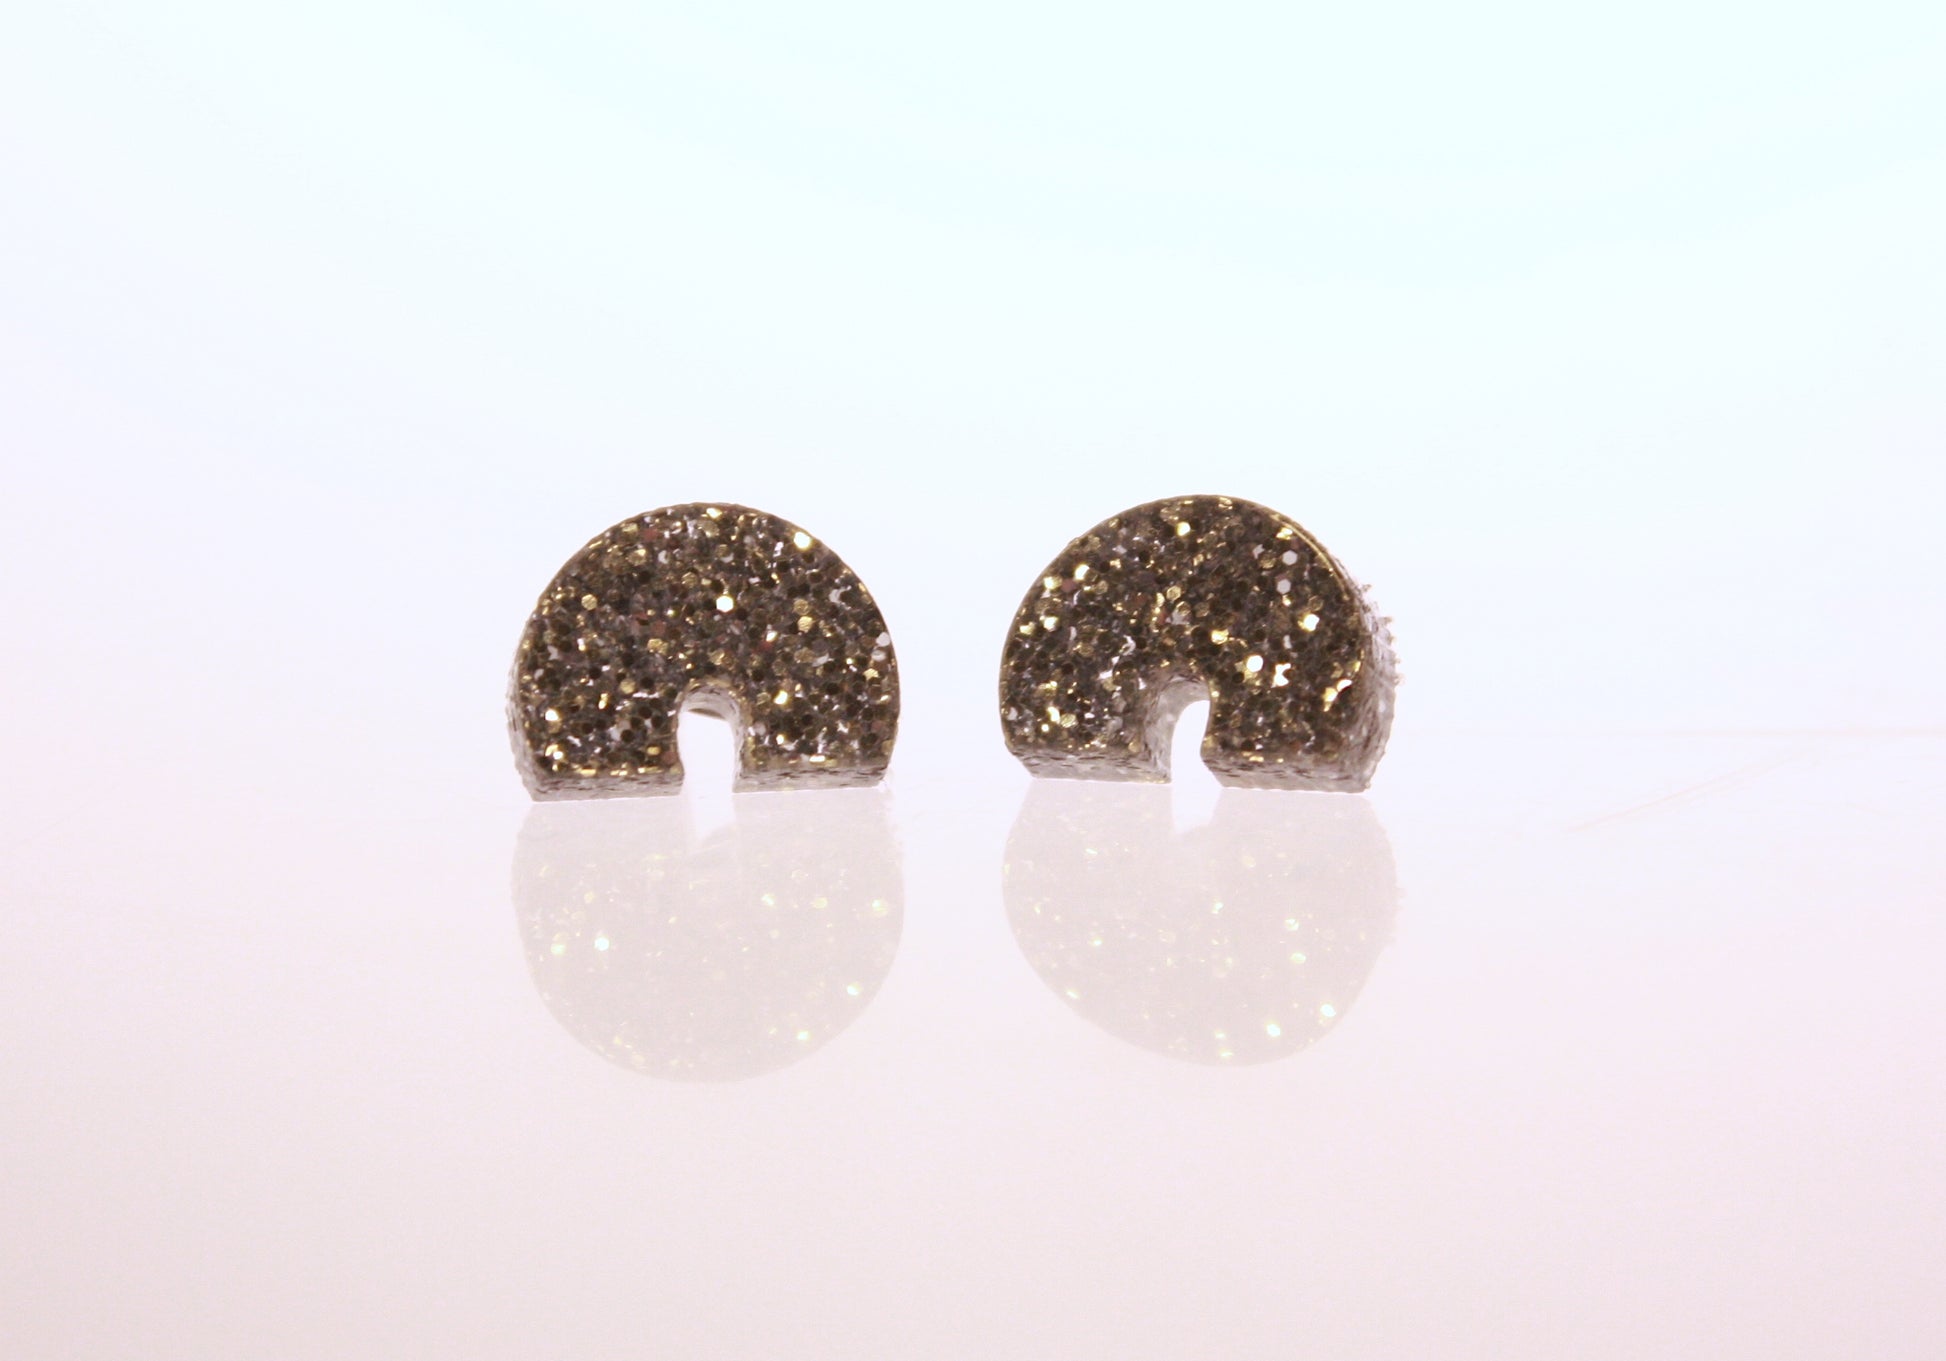 Close up of silver glitter acrylic St. Louis earrings.